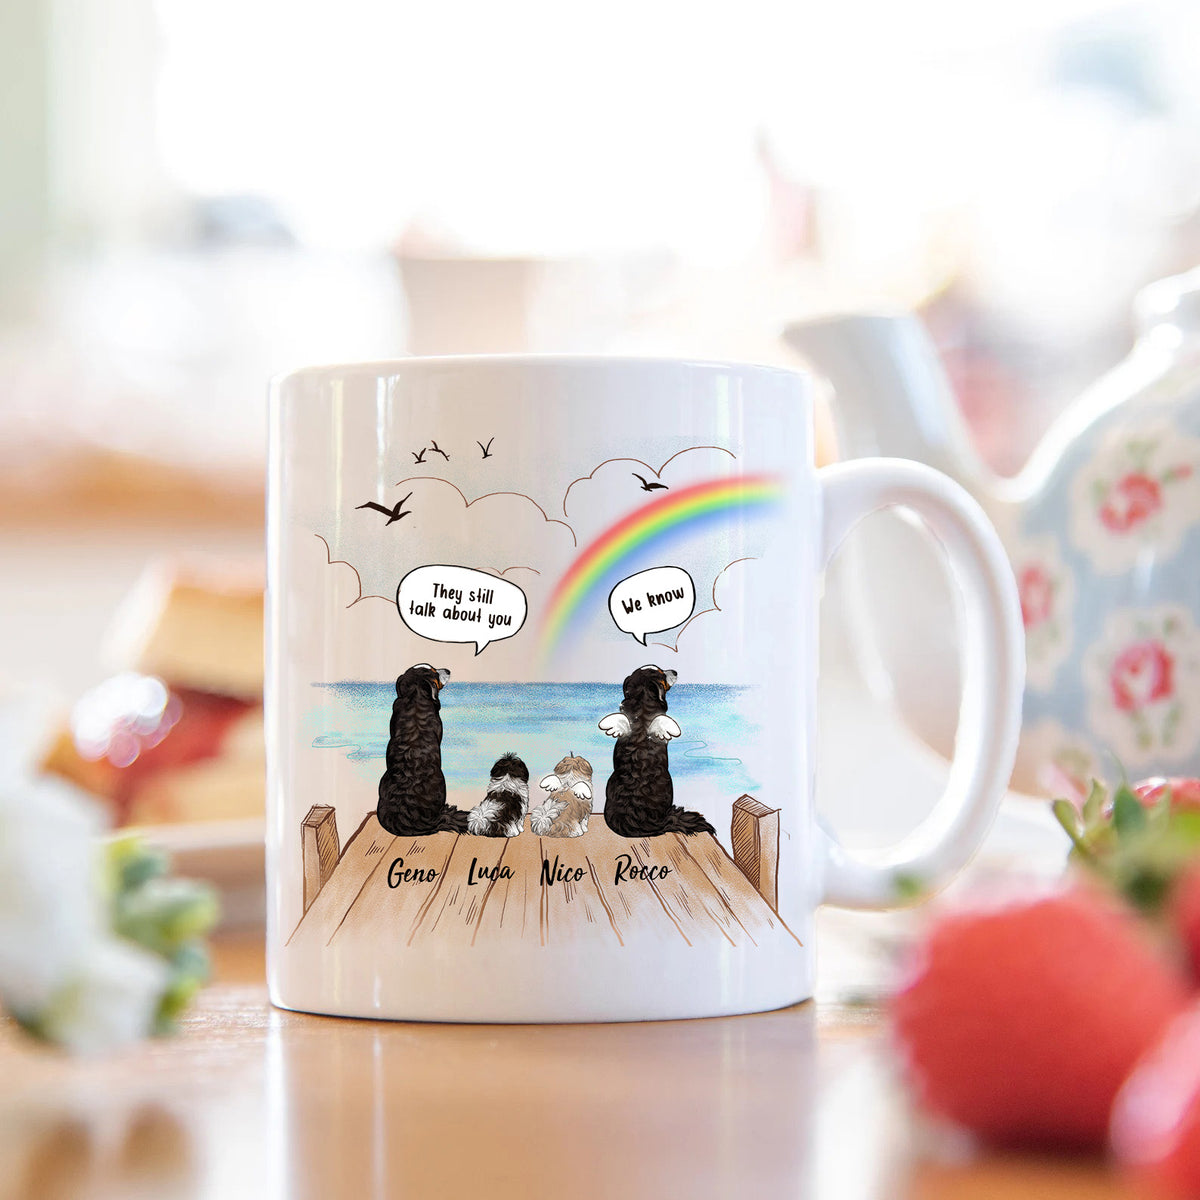 Personalized dog memorial gifts - Rainbow bridge - Coffee Mug - They still talk about you conversation - Wooden Dock